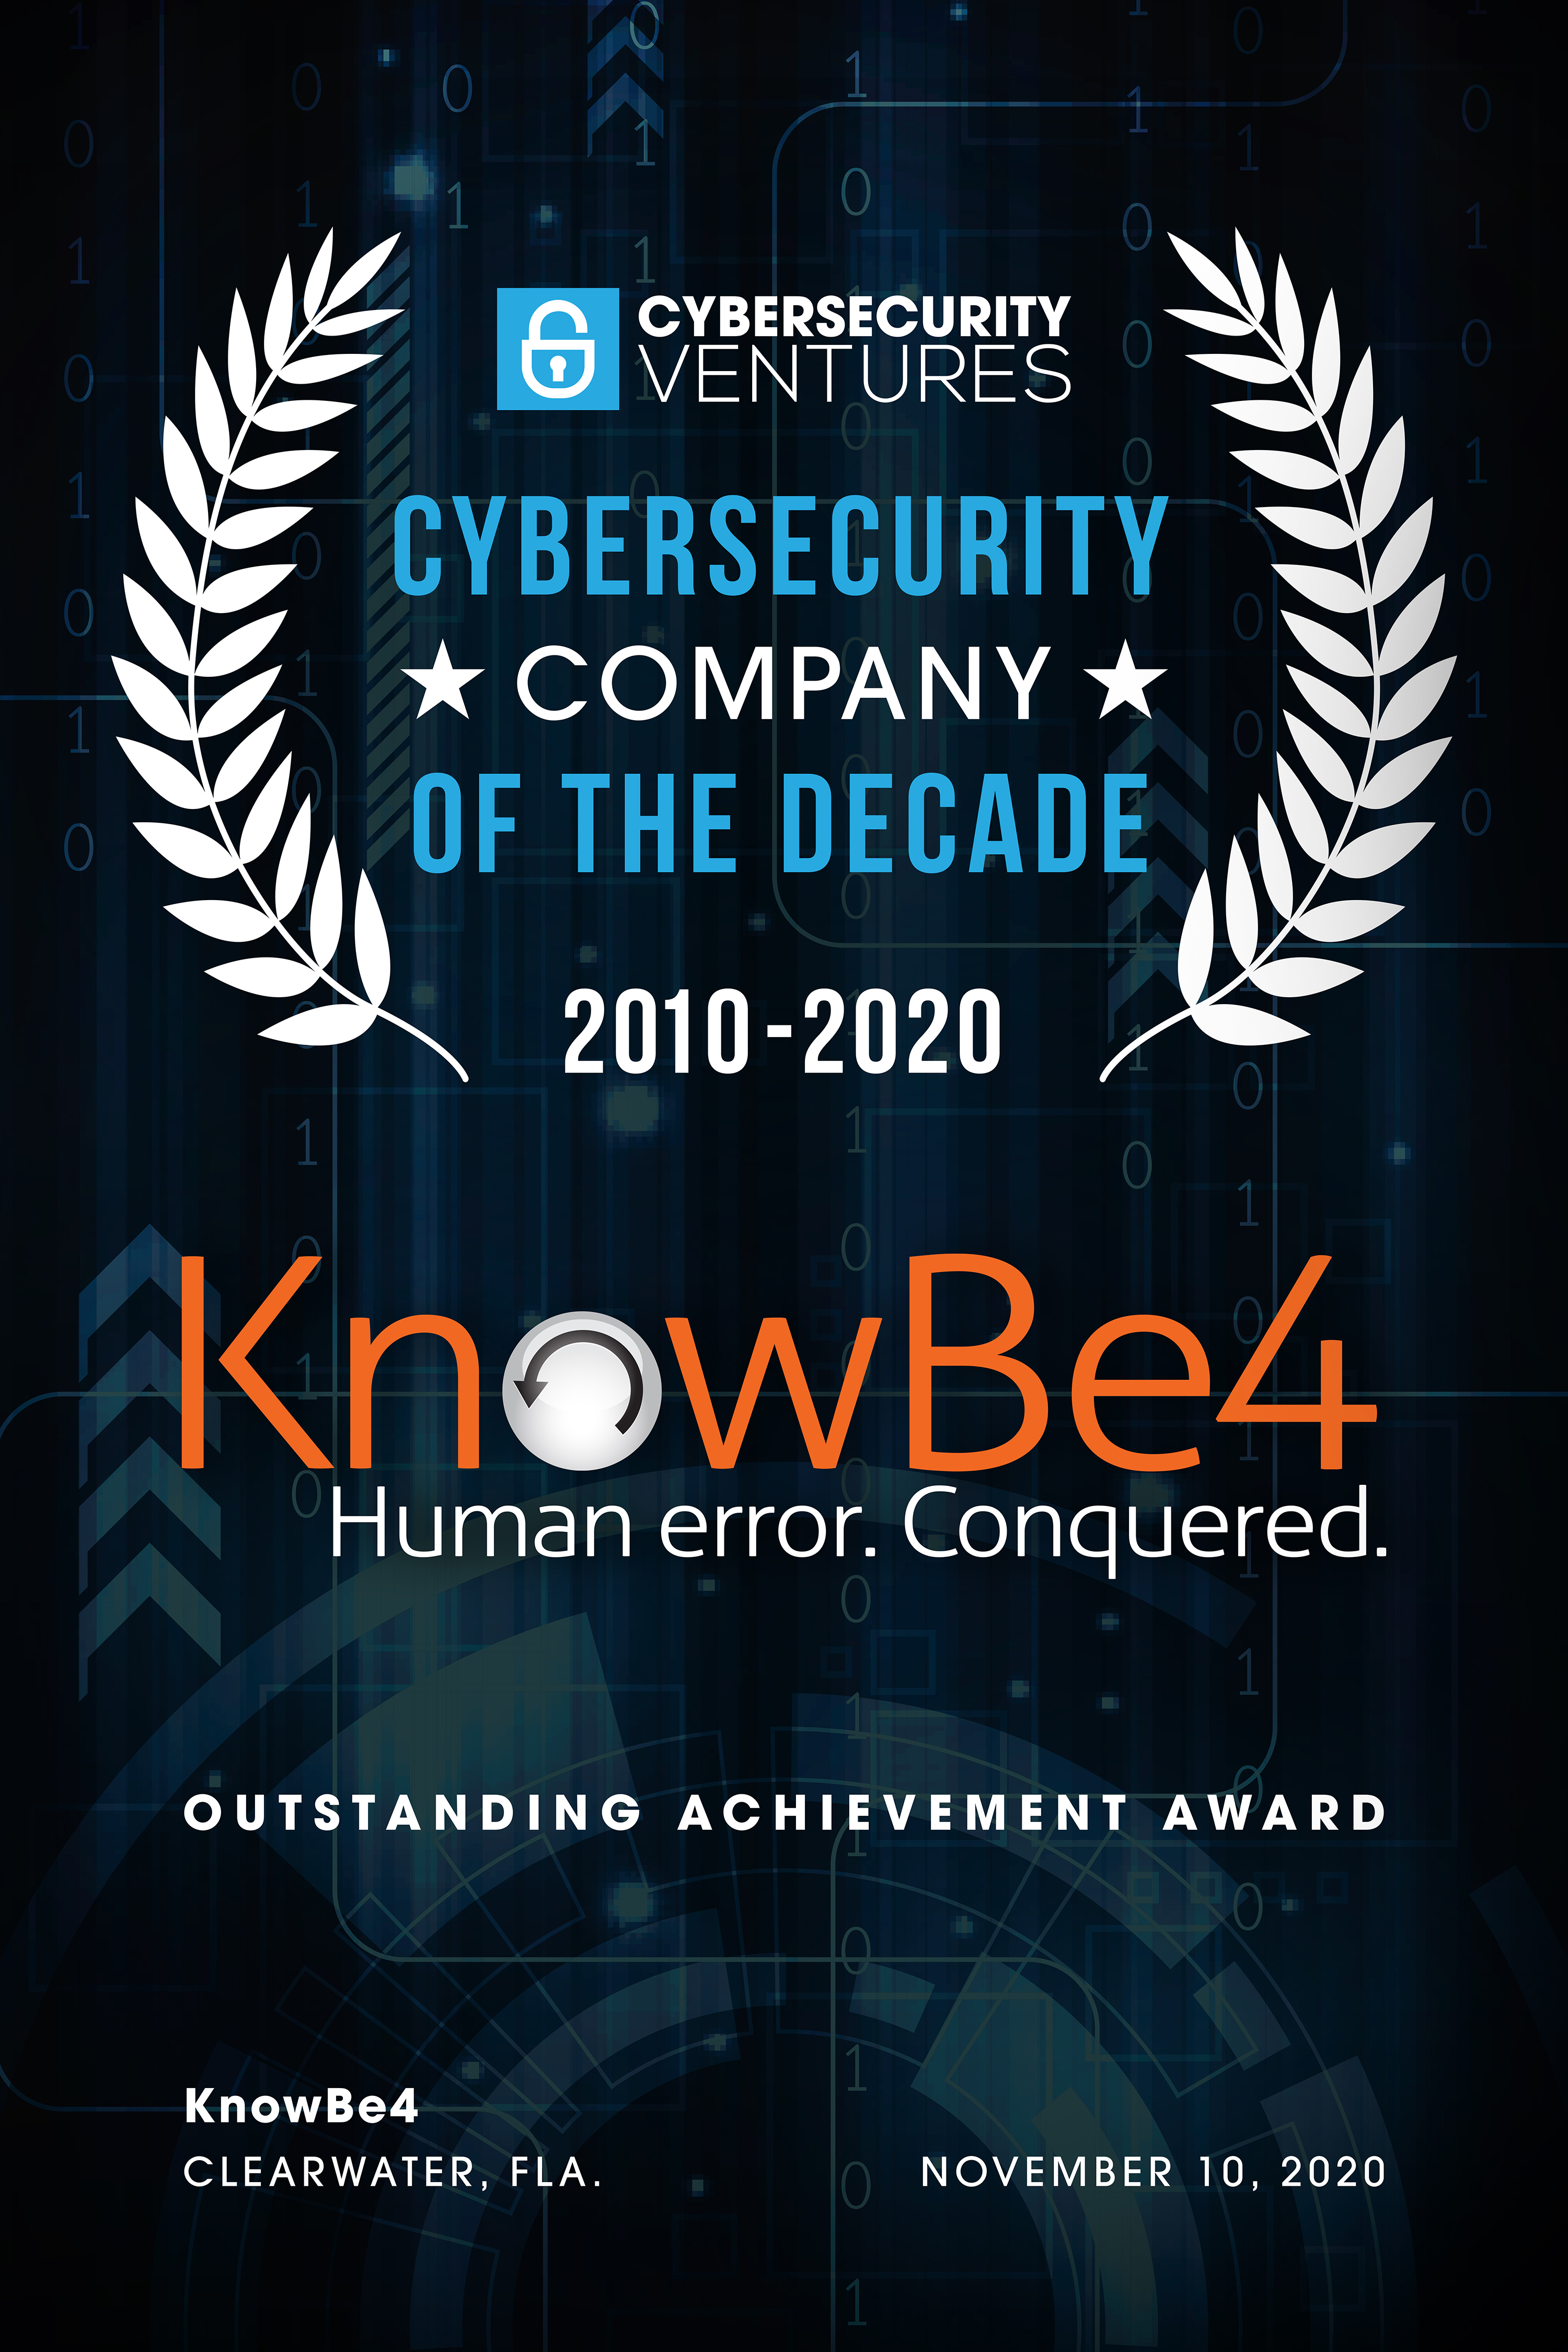 KnowBe4 Named Cybersecurity Company of the Decade by Cybercrime Magazine